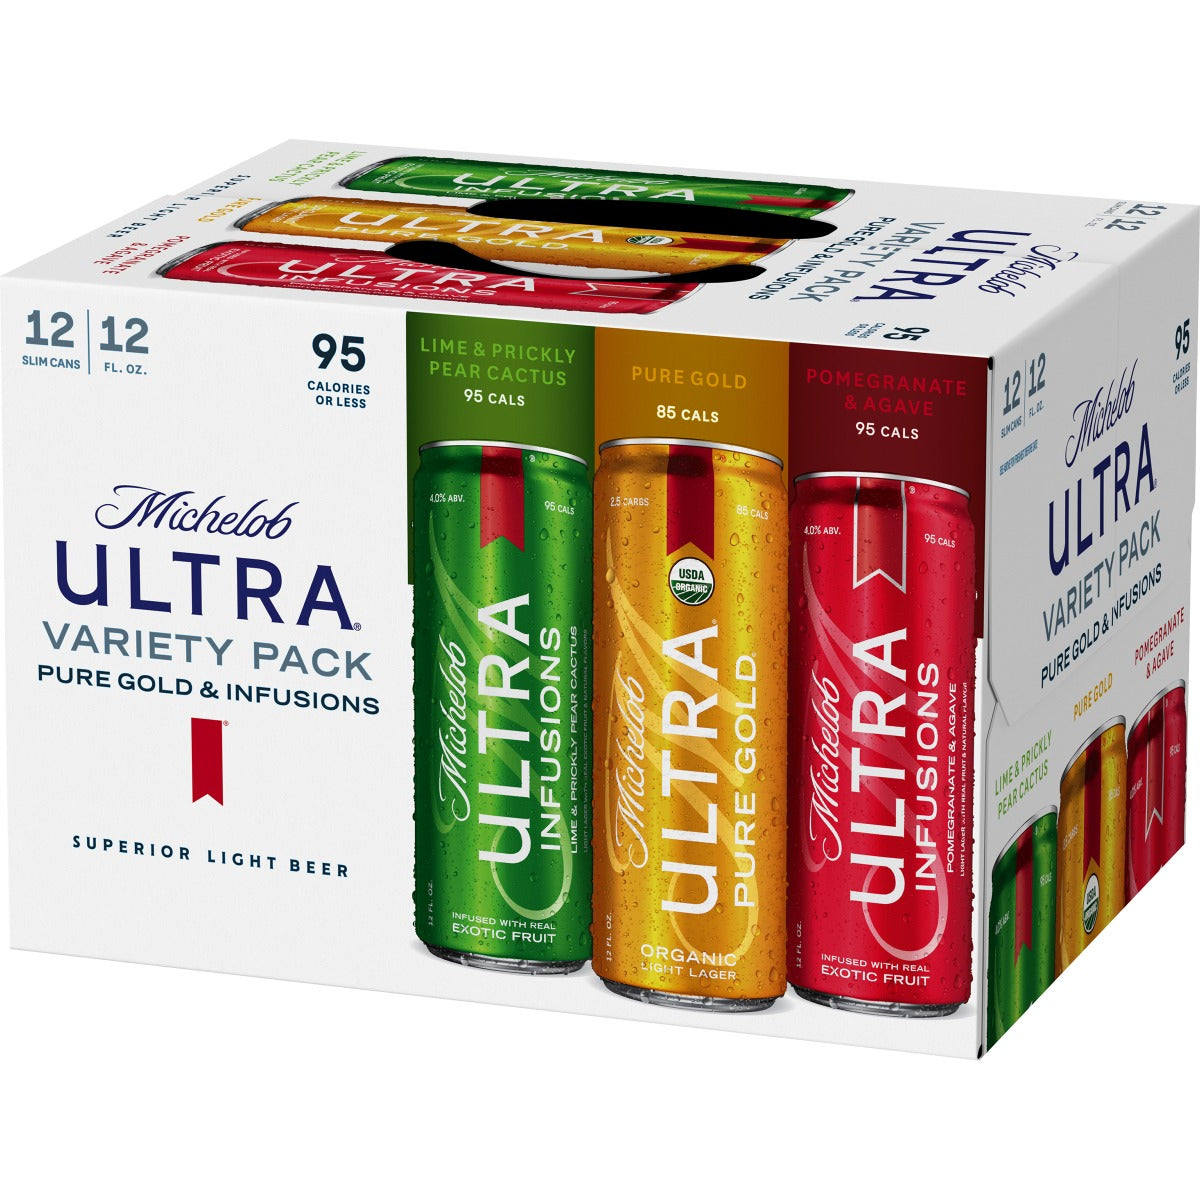 MICHELOB ULTRA ORGANIC VARIETY PACK PURE GOLD & INFUSIONS SUPERIOR LIGHT BEER 12X12OZ CAN